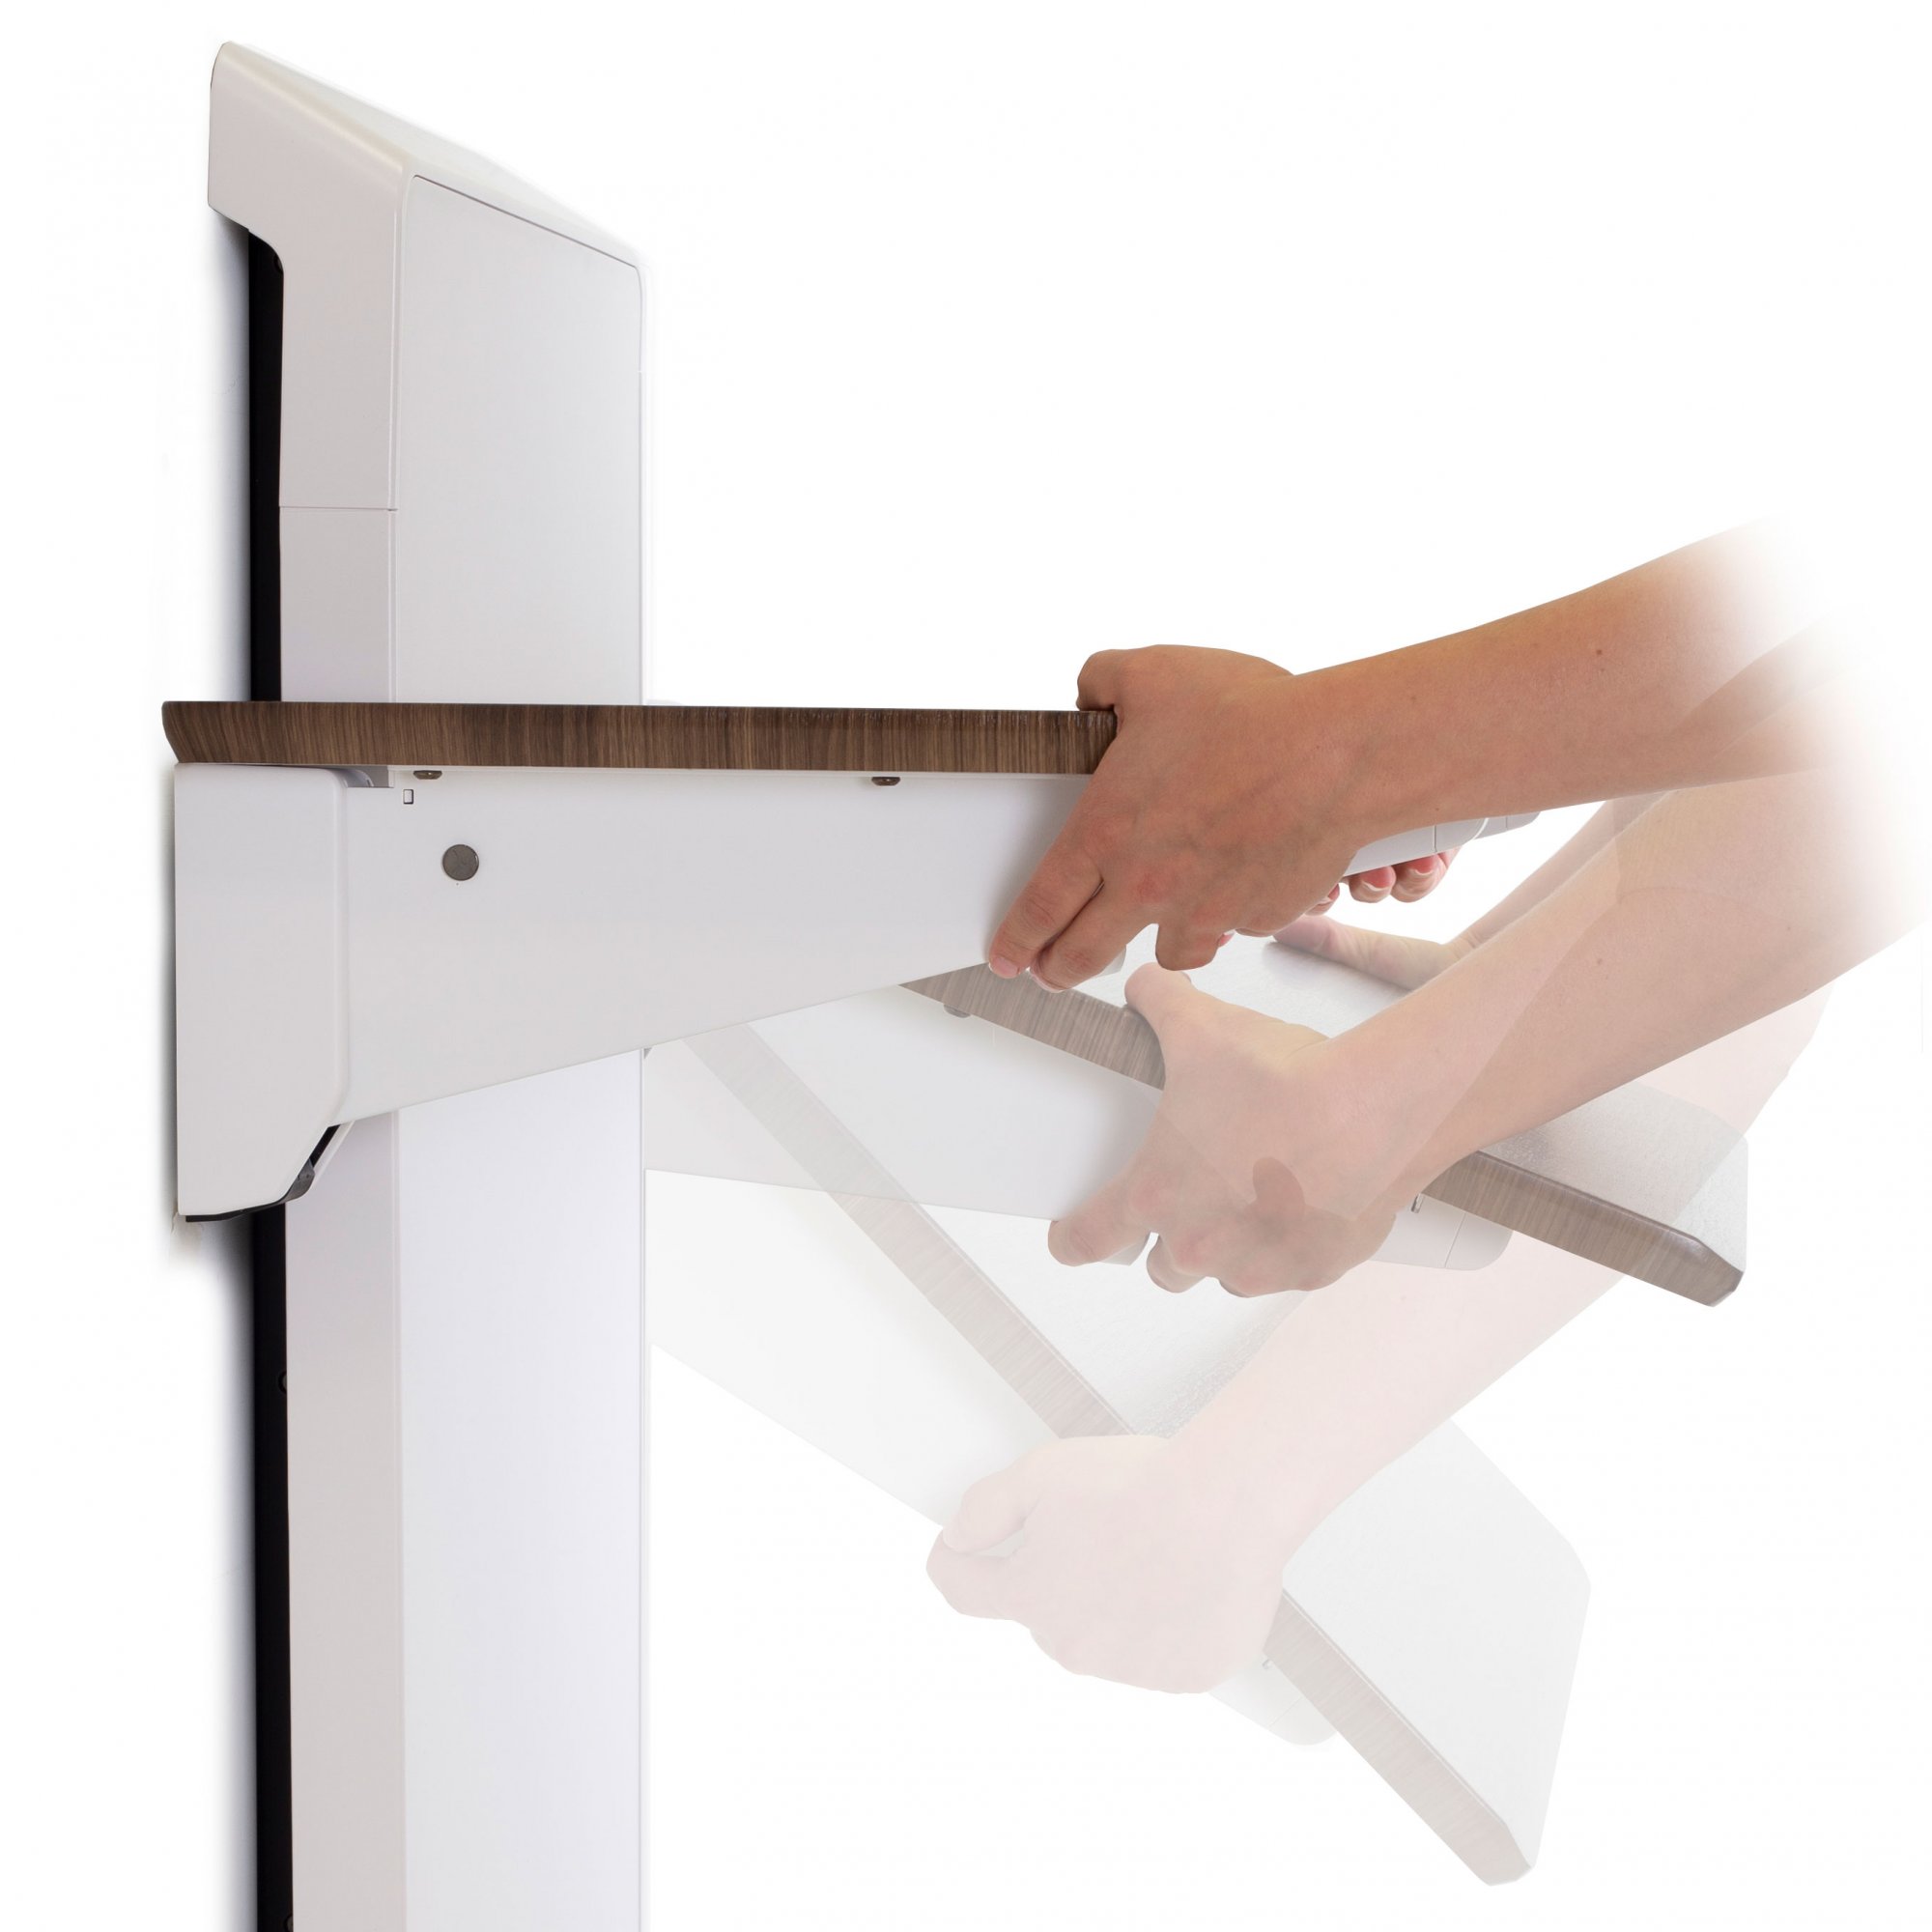 Worksurface folds down to within 7.3" (19 cm) of wall